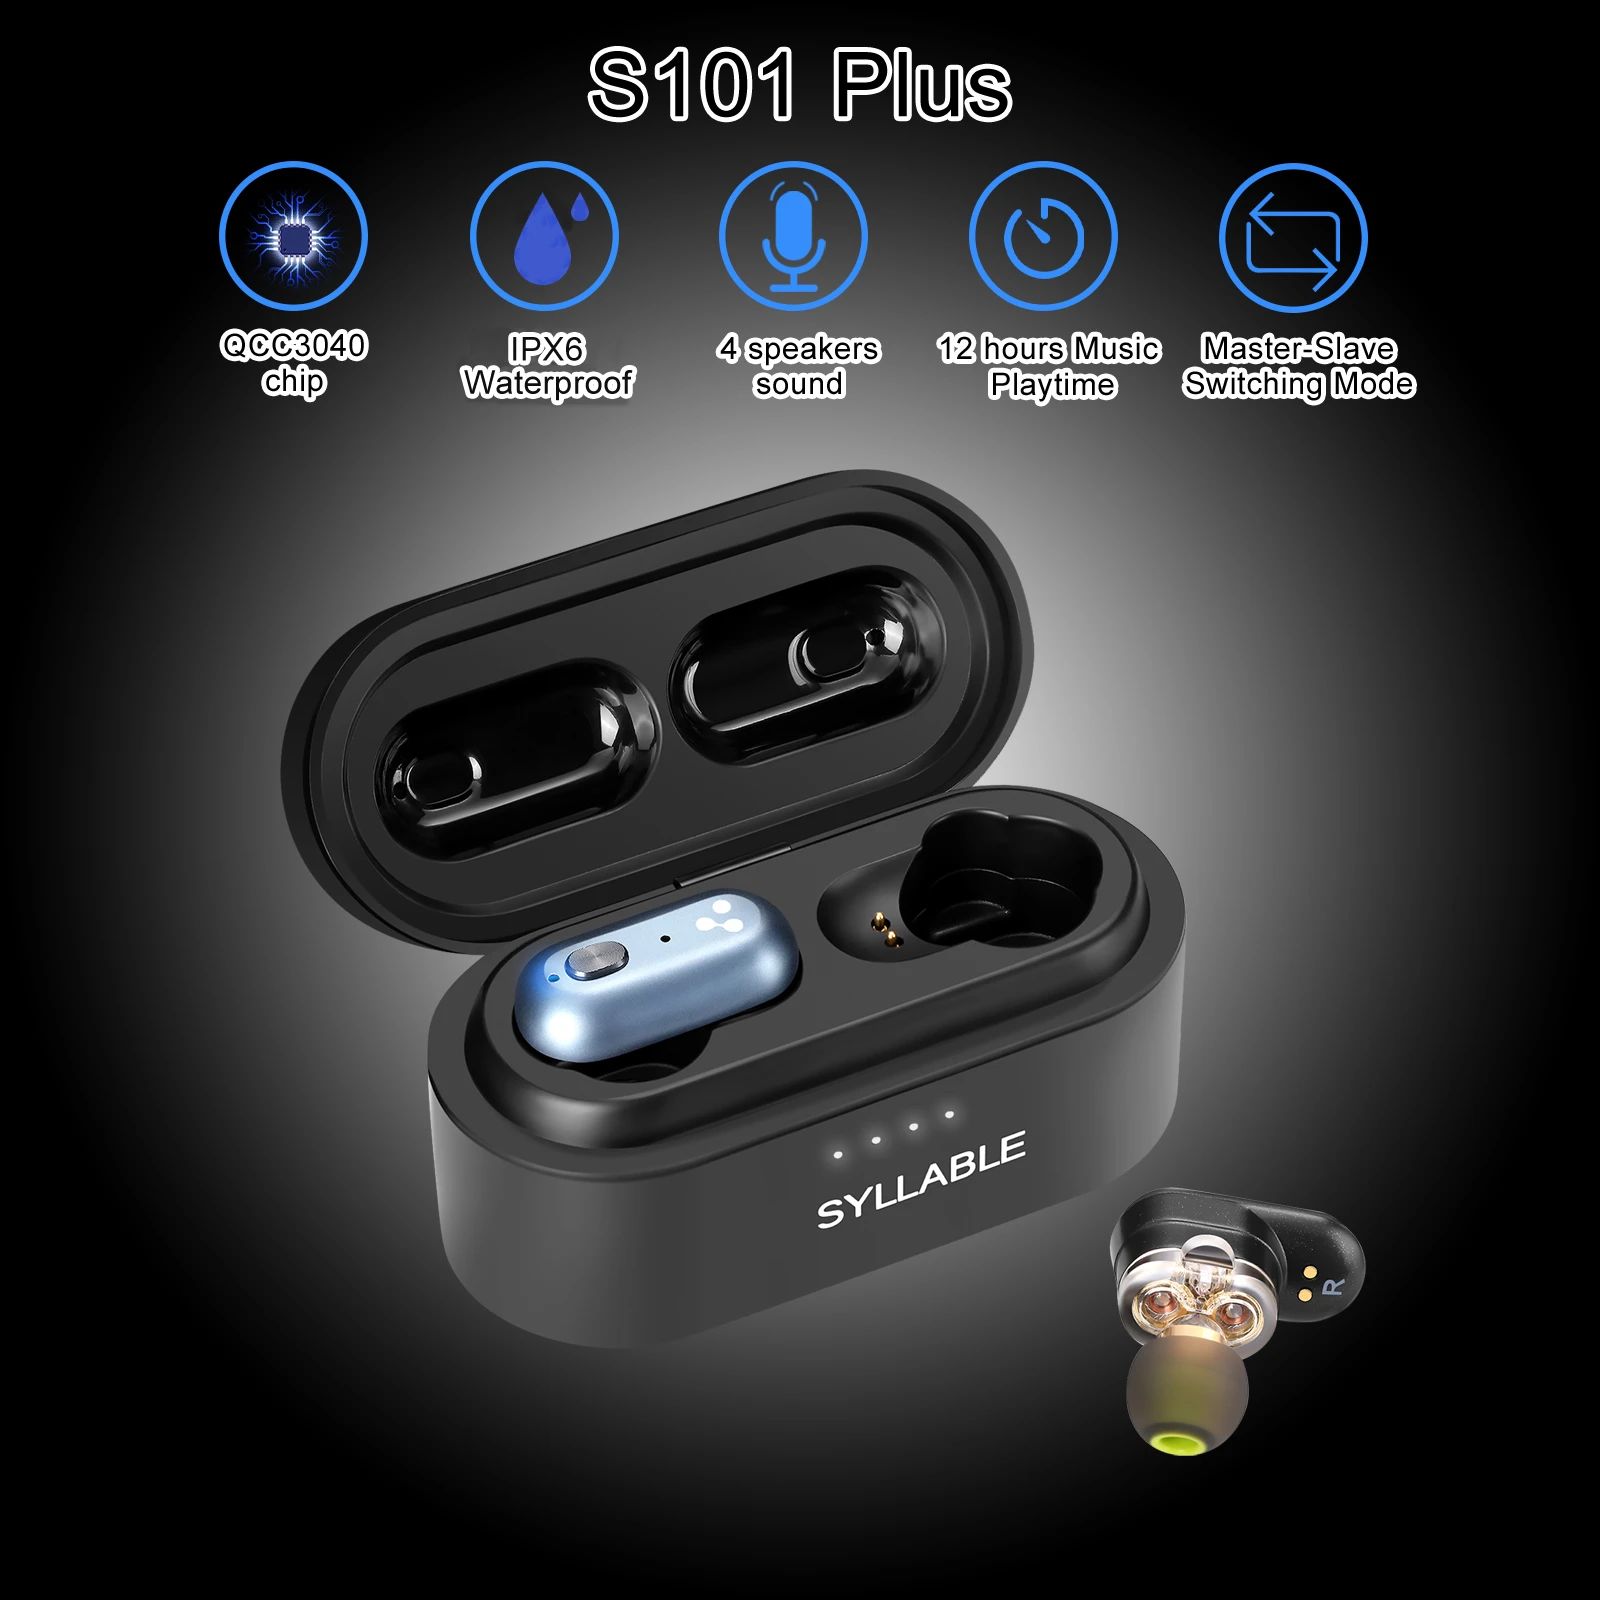 Newest SYLLABLE S101 Plus TWS of QCC3040 Chip Fit for BT 5.2 Earphones 12 hours True Wireless Stereo Earbuds Strong bass Headset